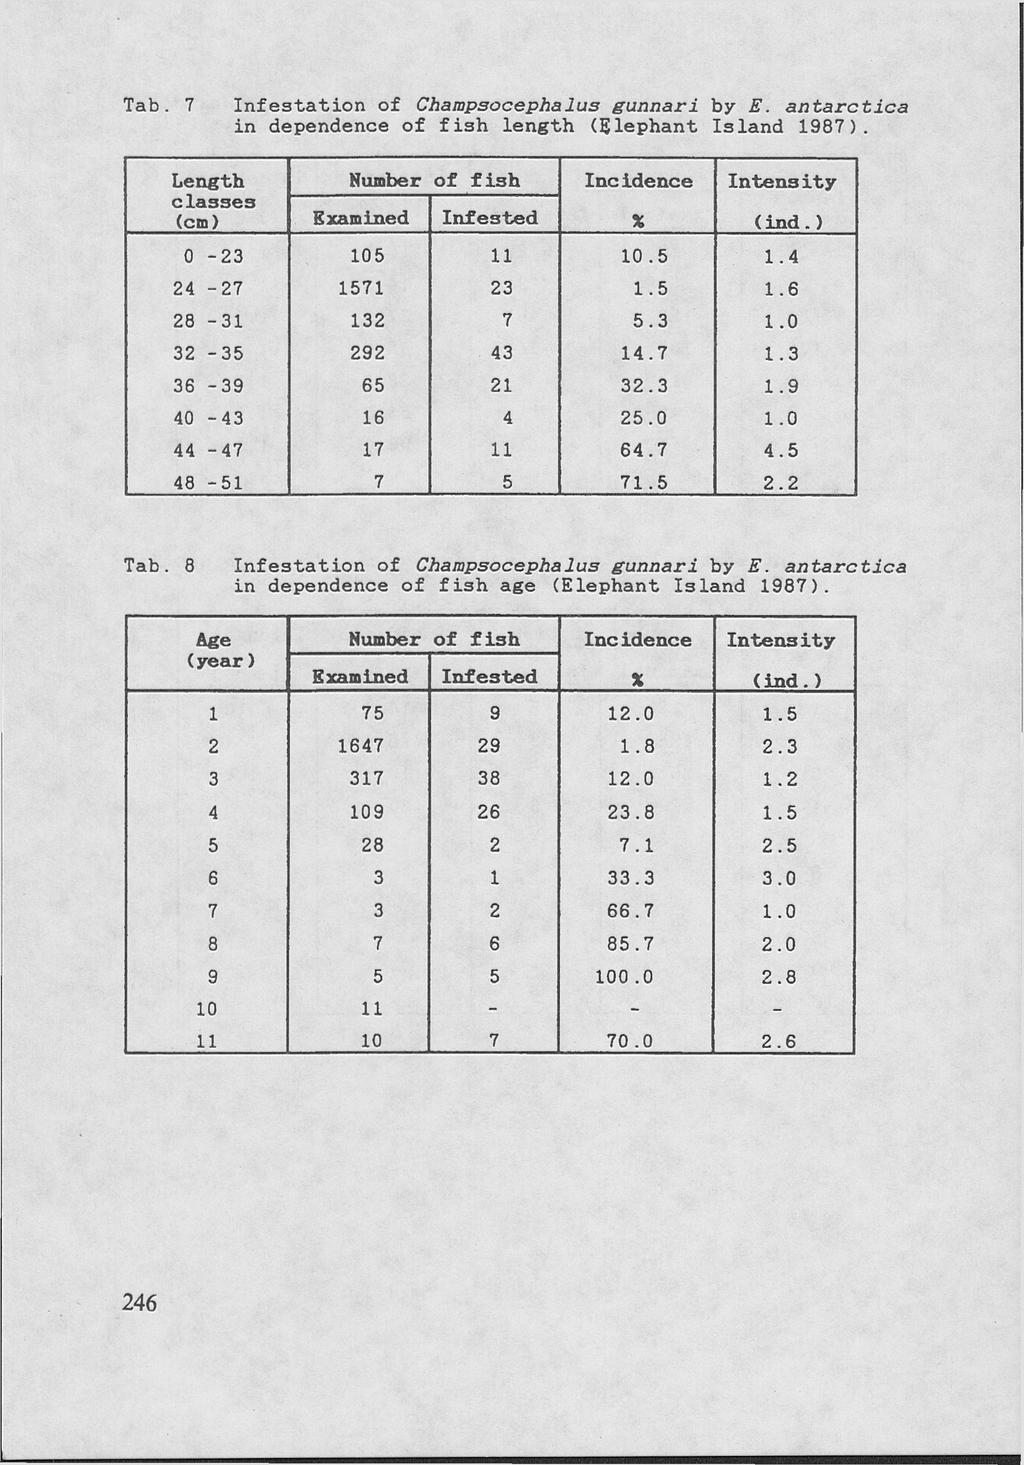 Tab. in dependence of fish length ( e a 198). Length Number of fish Incidence Intensity с1аззез (cm) Examined Infested % (ind.) 0-23 105 11 10.5 1.4 24-27 1571 23 1.5 1.6 28-31 132 7 5.3 1.0 32-35 292 43 14.